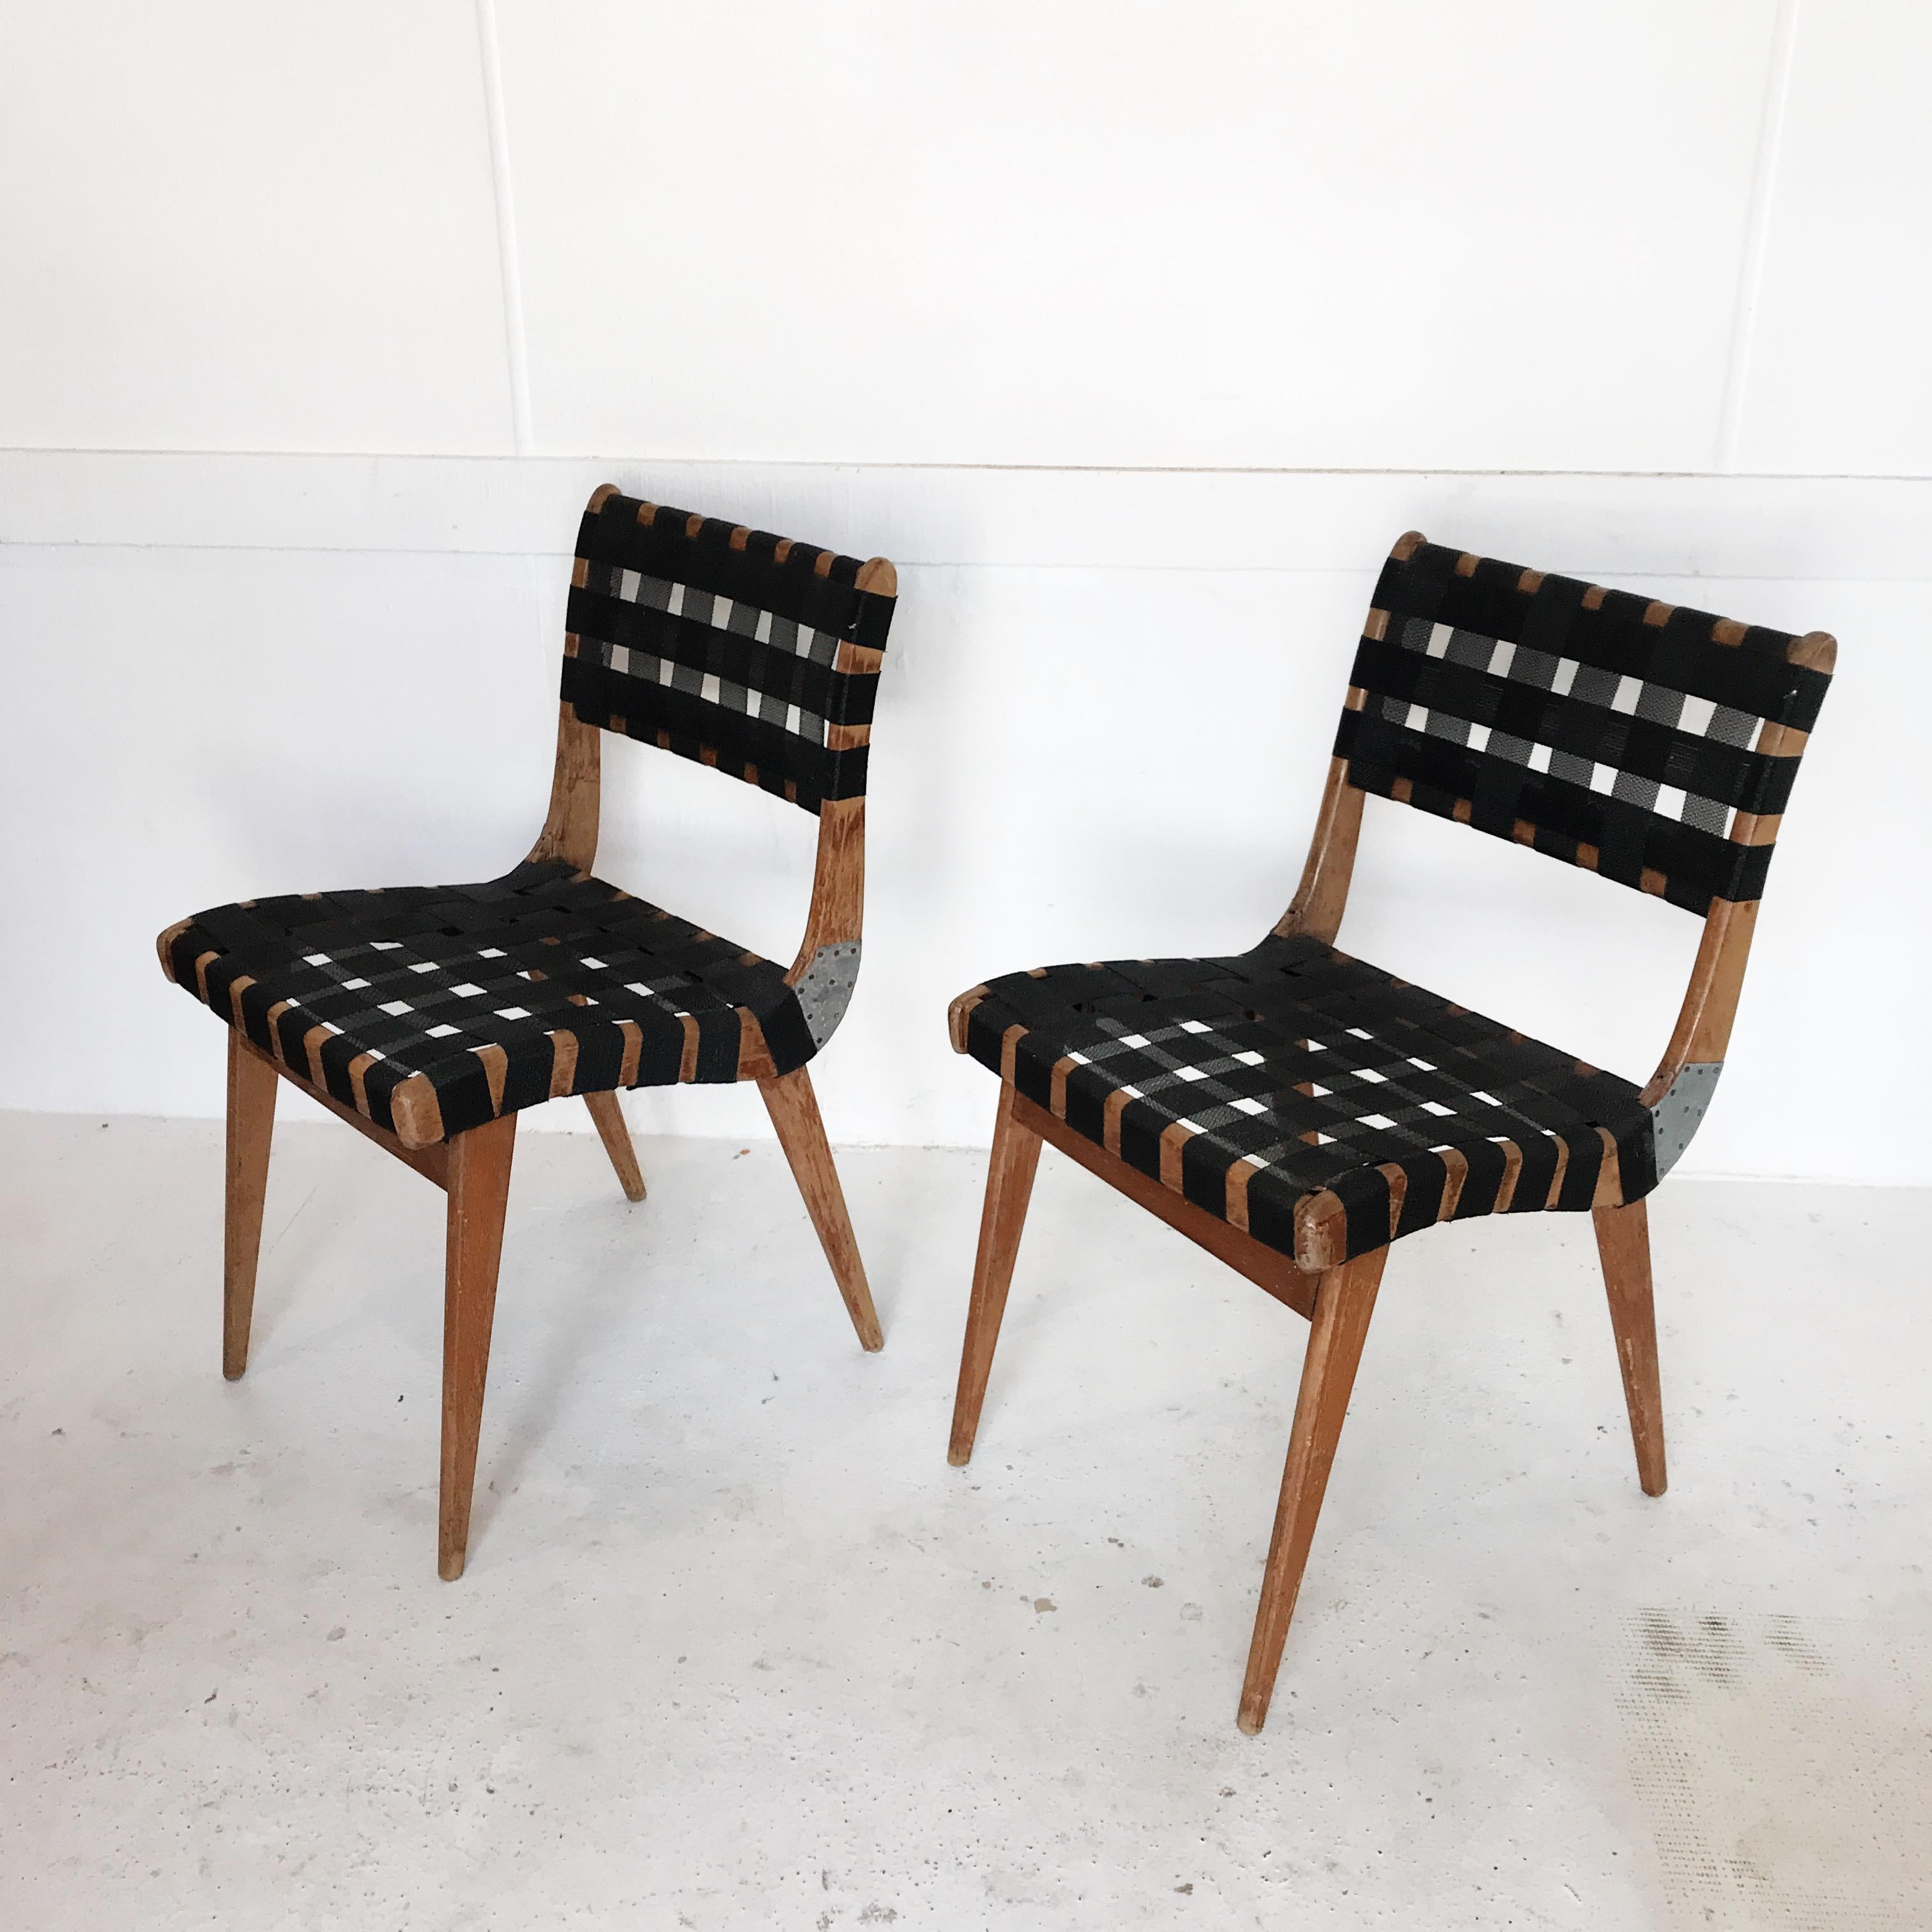 Cutting edge Australian post-war design from 1955. 

Many regard Snelling as the Asian-Pacific link to Californian modern design. Here we have an all original pair of Douglas Snelling dining chairs, exhibiting that wonderful 